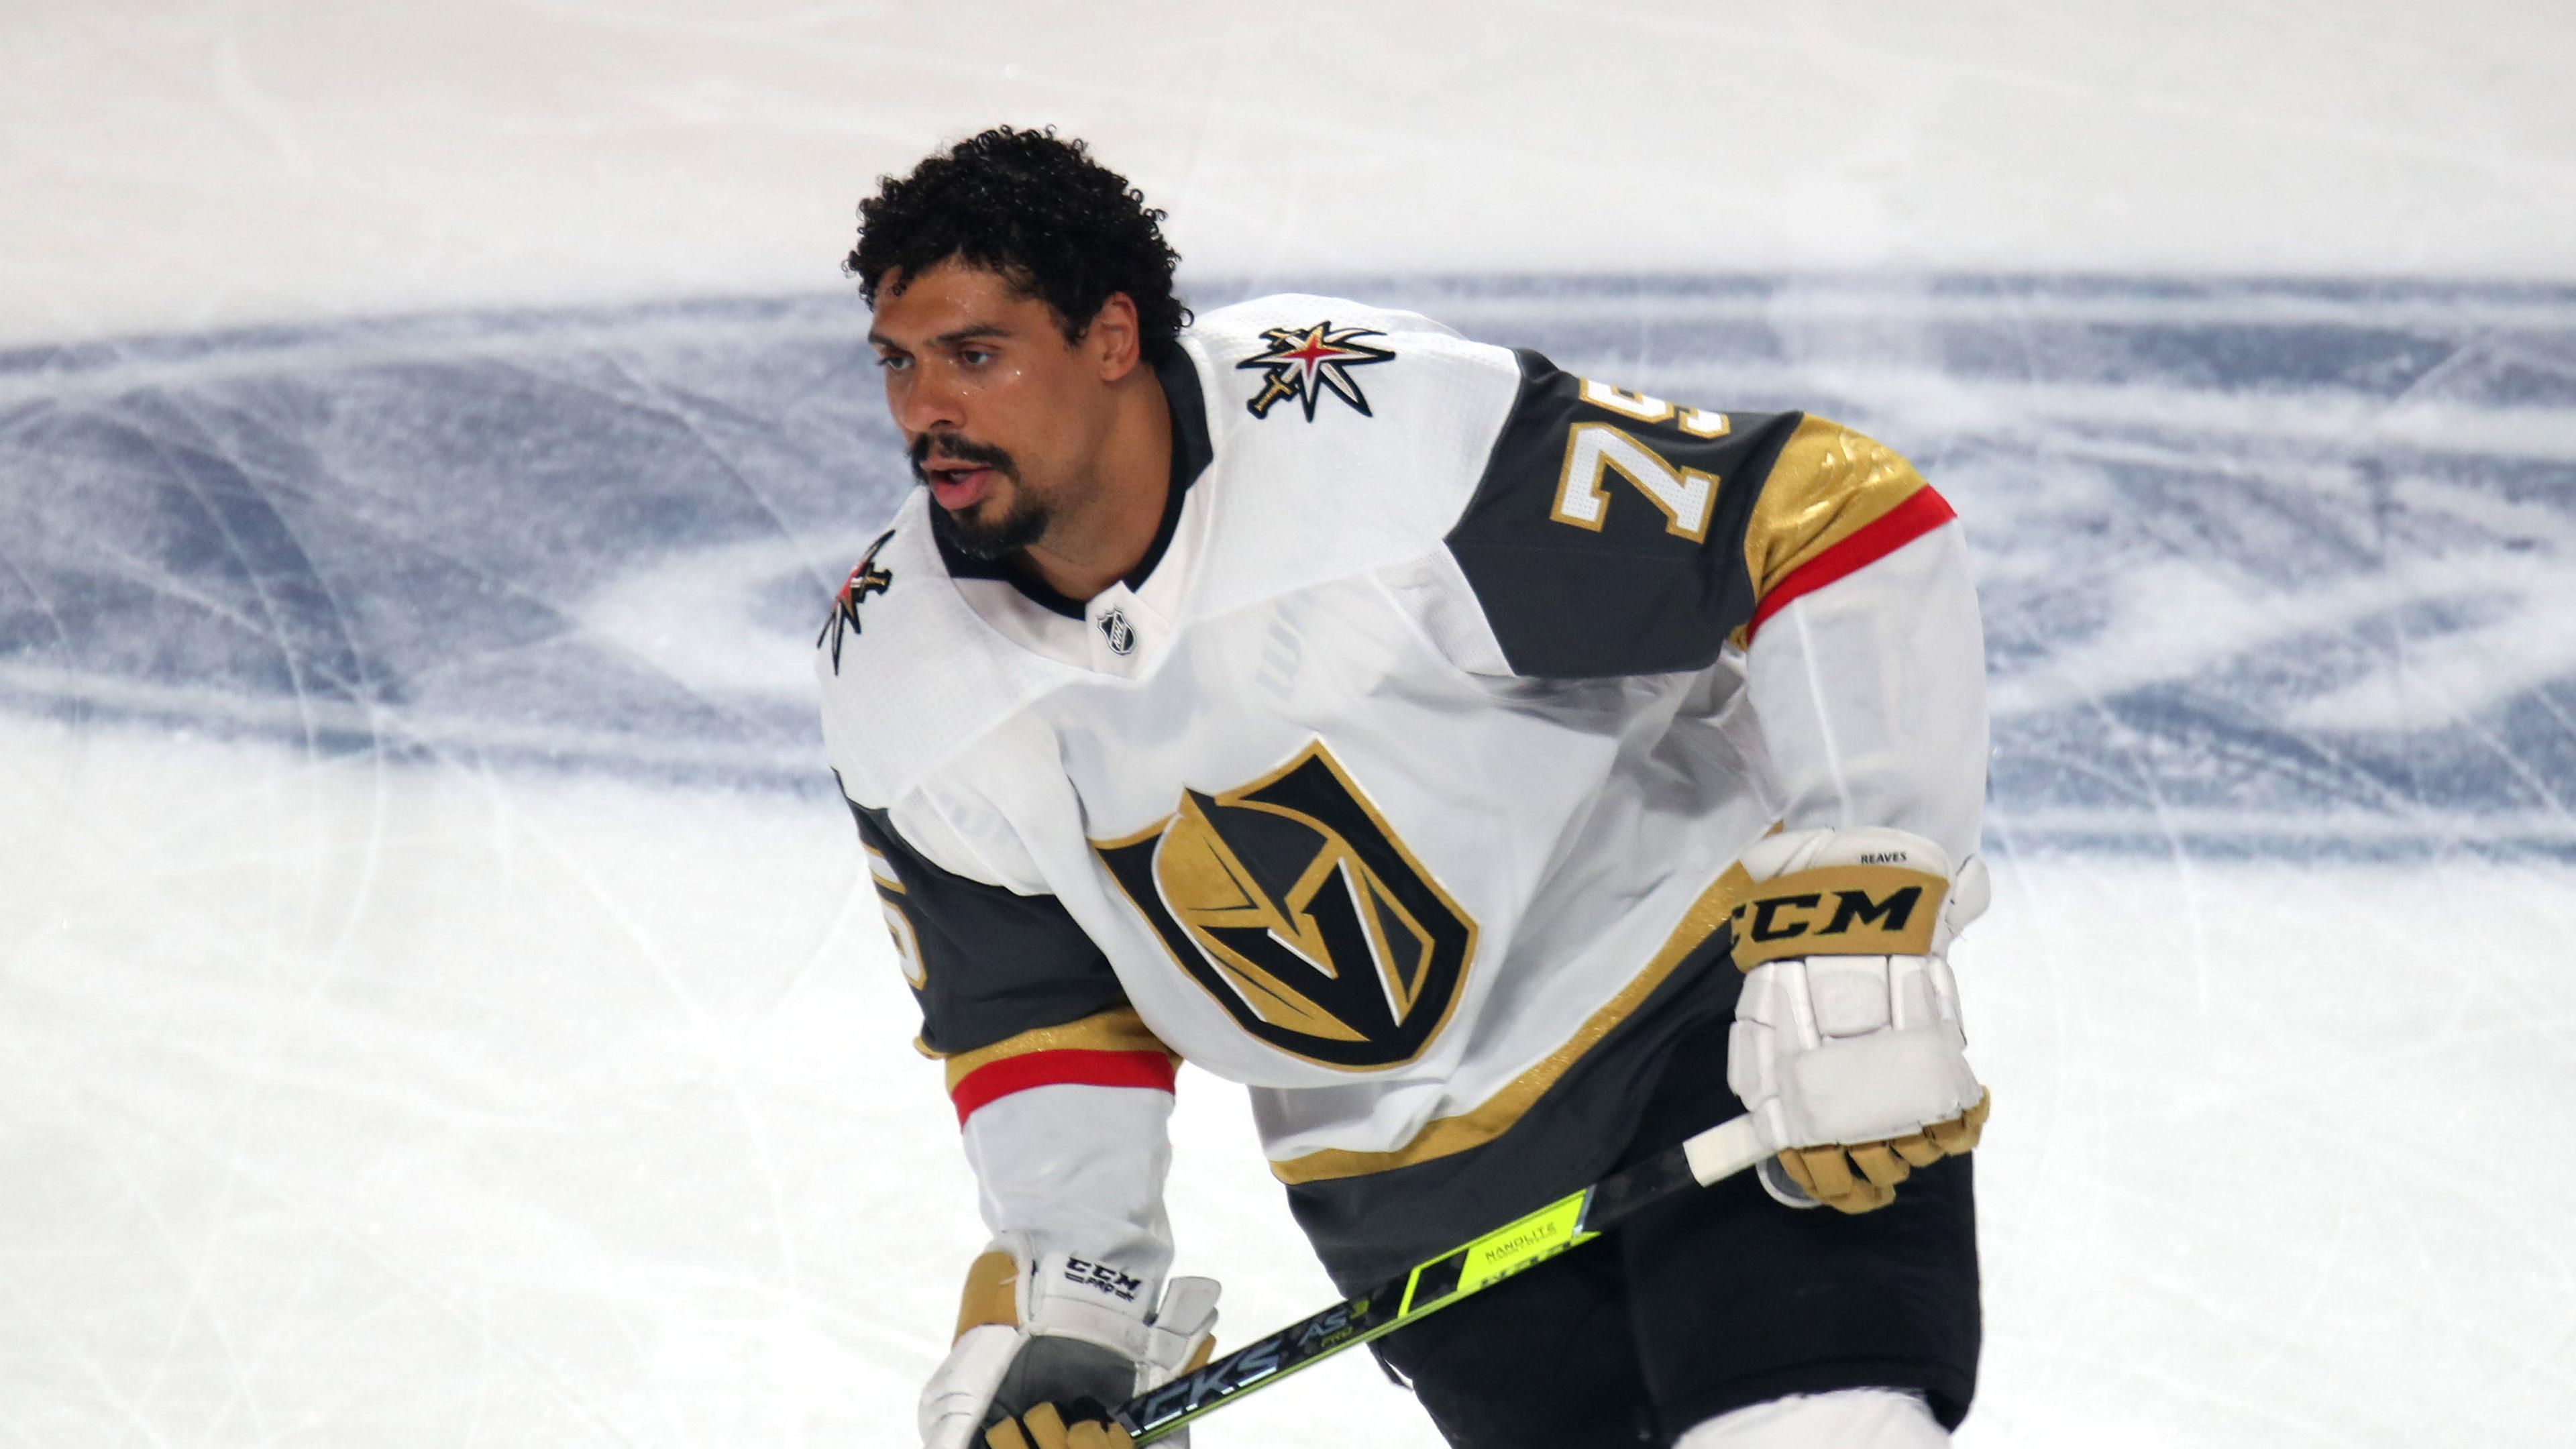 Vegas Golden Knights right wing Ryan Reaves (75) during the warm up session before the game three against Montreal Canadiens of the 2021 Stanley Cup Semifinals at Bell Centre. / Jean-Yves Ahern-USA TODAY Sports